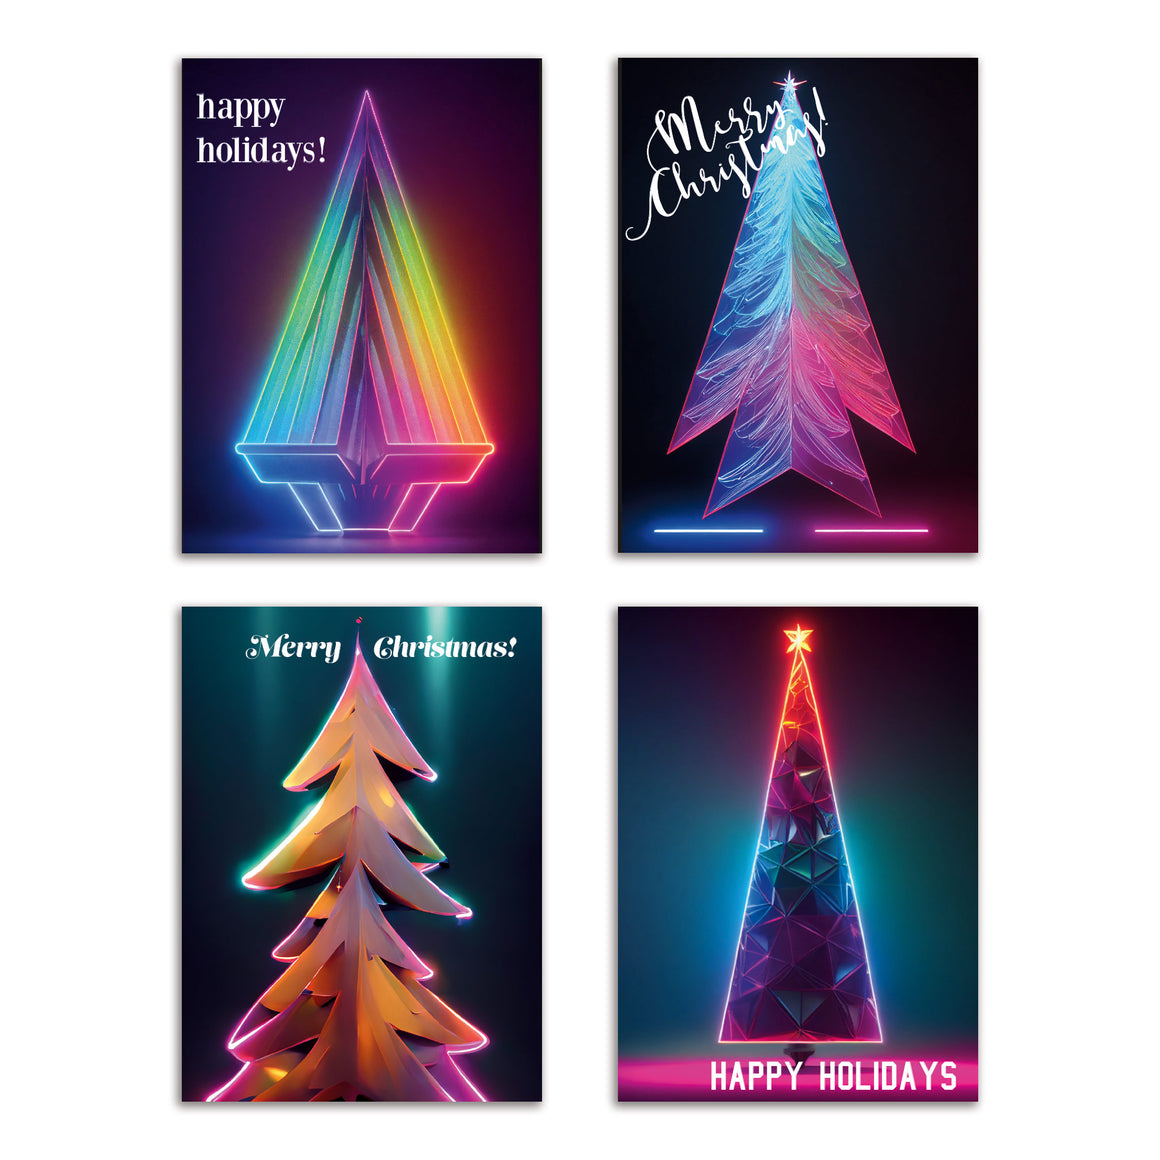 24 Modern Christmas Tree Greeting Cards in 4 Neon Designs + Envelopes